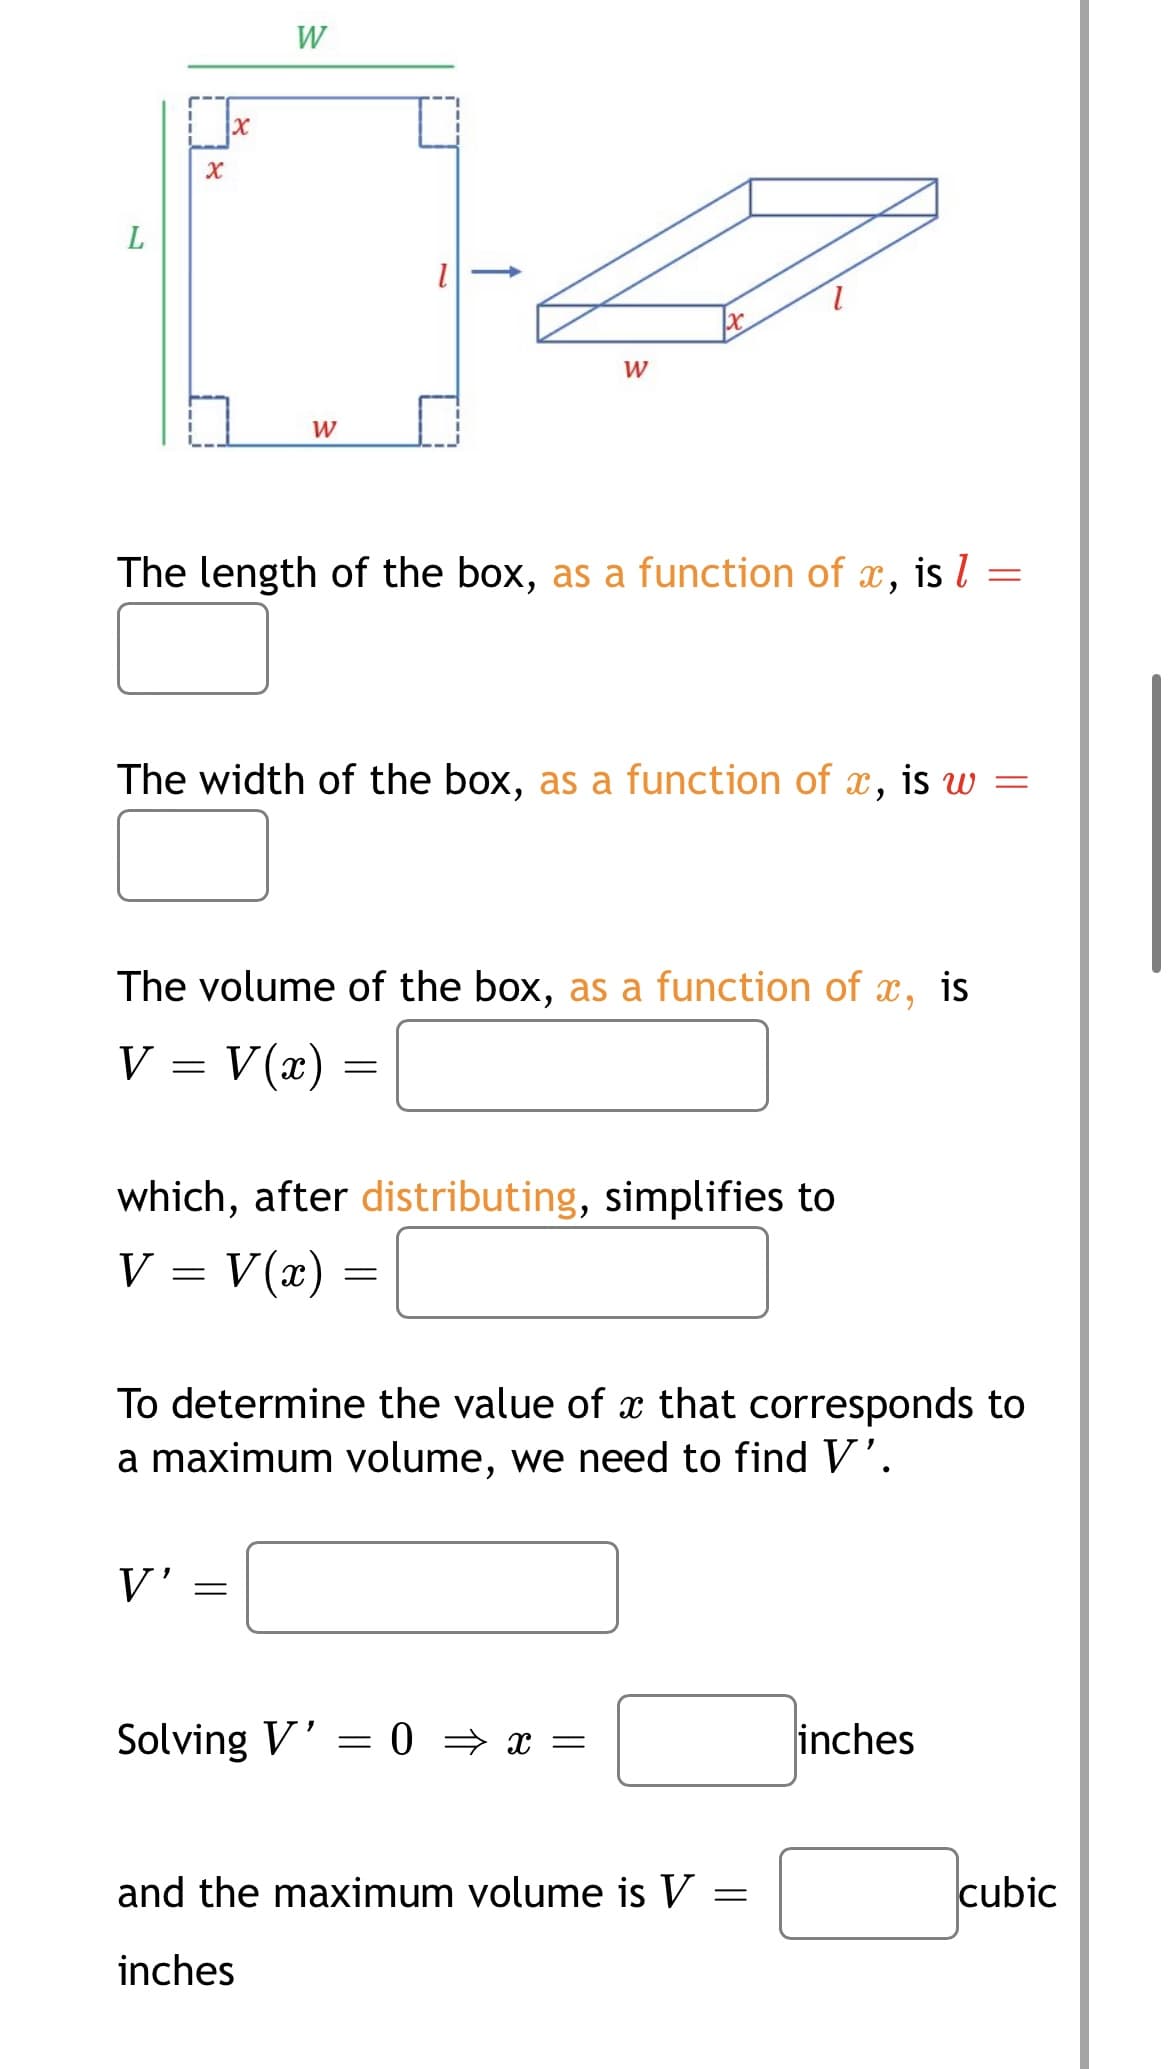 W
W
W
The length of the box, as a function of x,
is l =
The width of the box, as a function of x, is w
The volume of the box, as a function of x, is
V = V(x) =
which, after distributing, simplifies to
V :
V(x) =
To determine the value of x that corresponds to
a maximum volume, we need to find V'.
V'
Solving V' = 0 = x =
inches
and the maximum volume is V
cubic
inches
